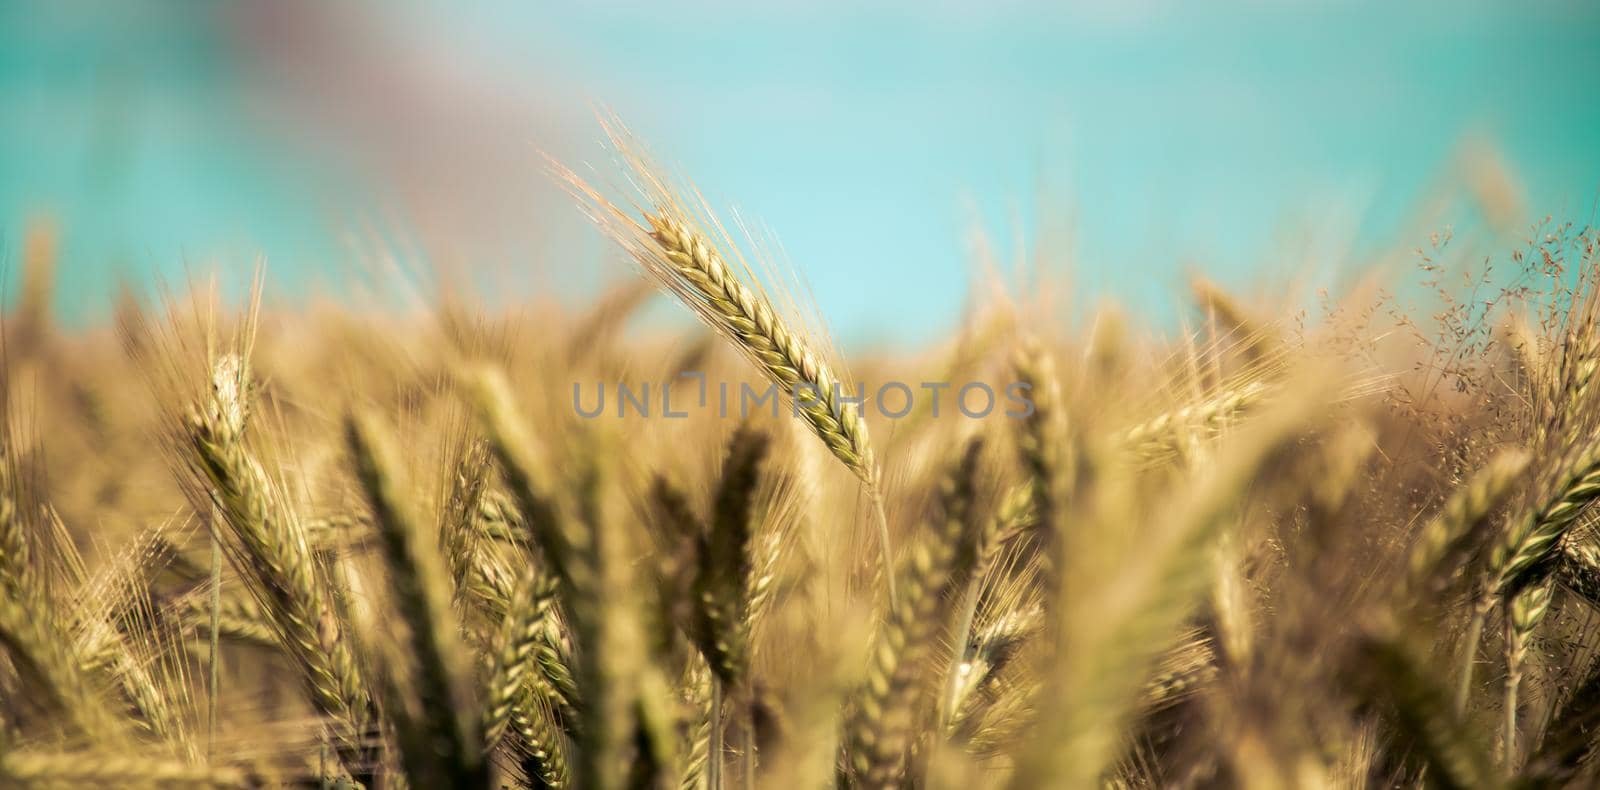 Agriculture field: Ripe ears of wheat, harvest by Daxenbichler